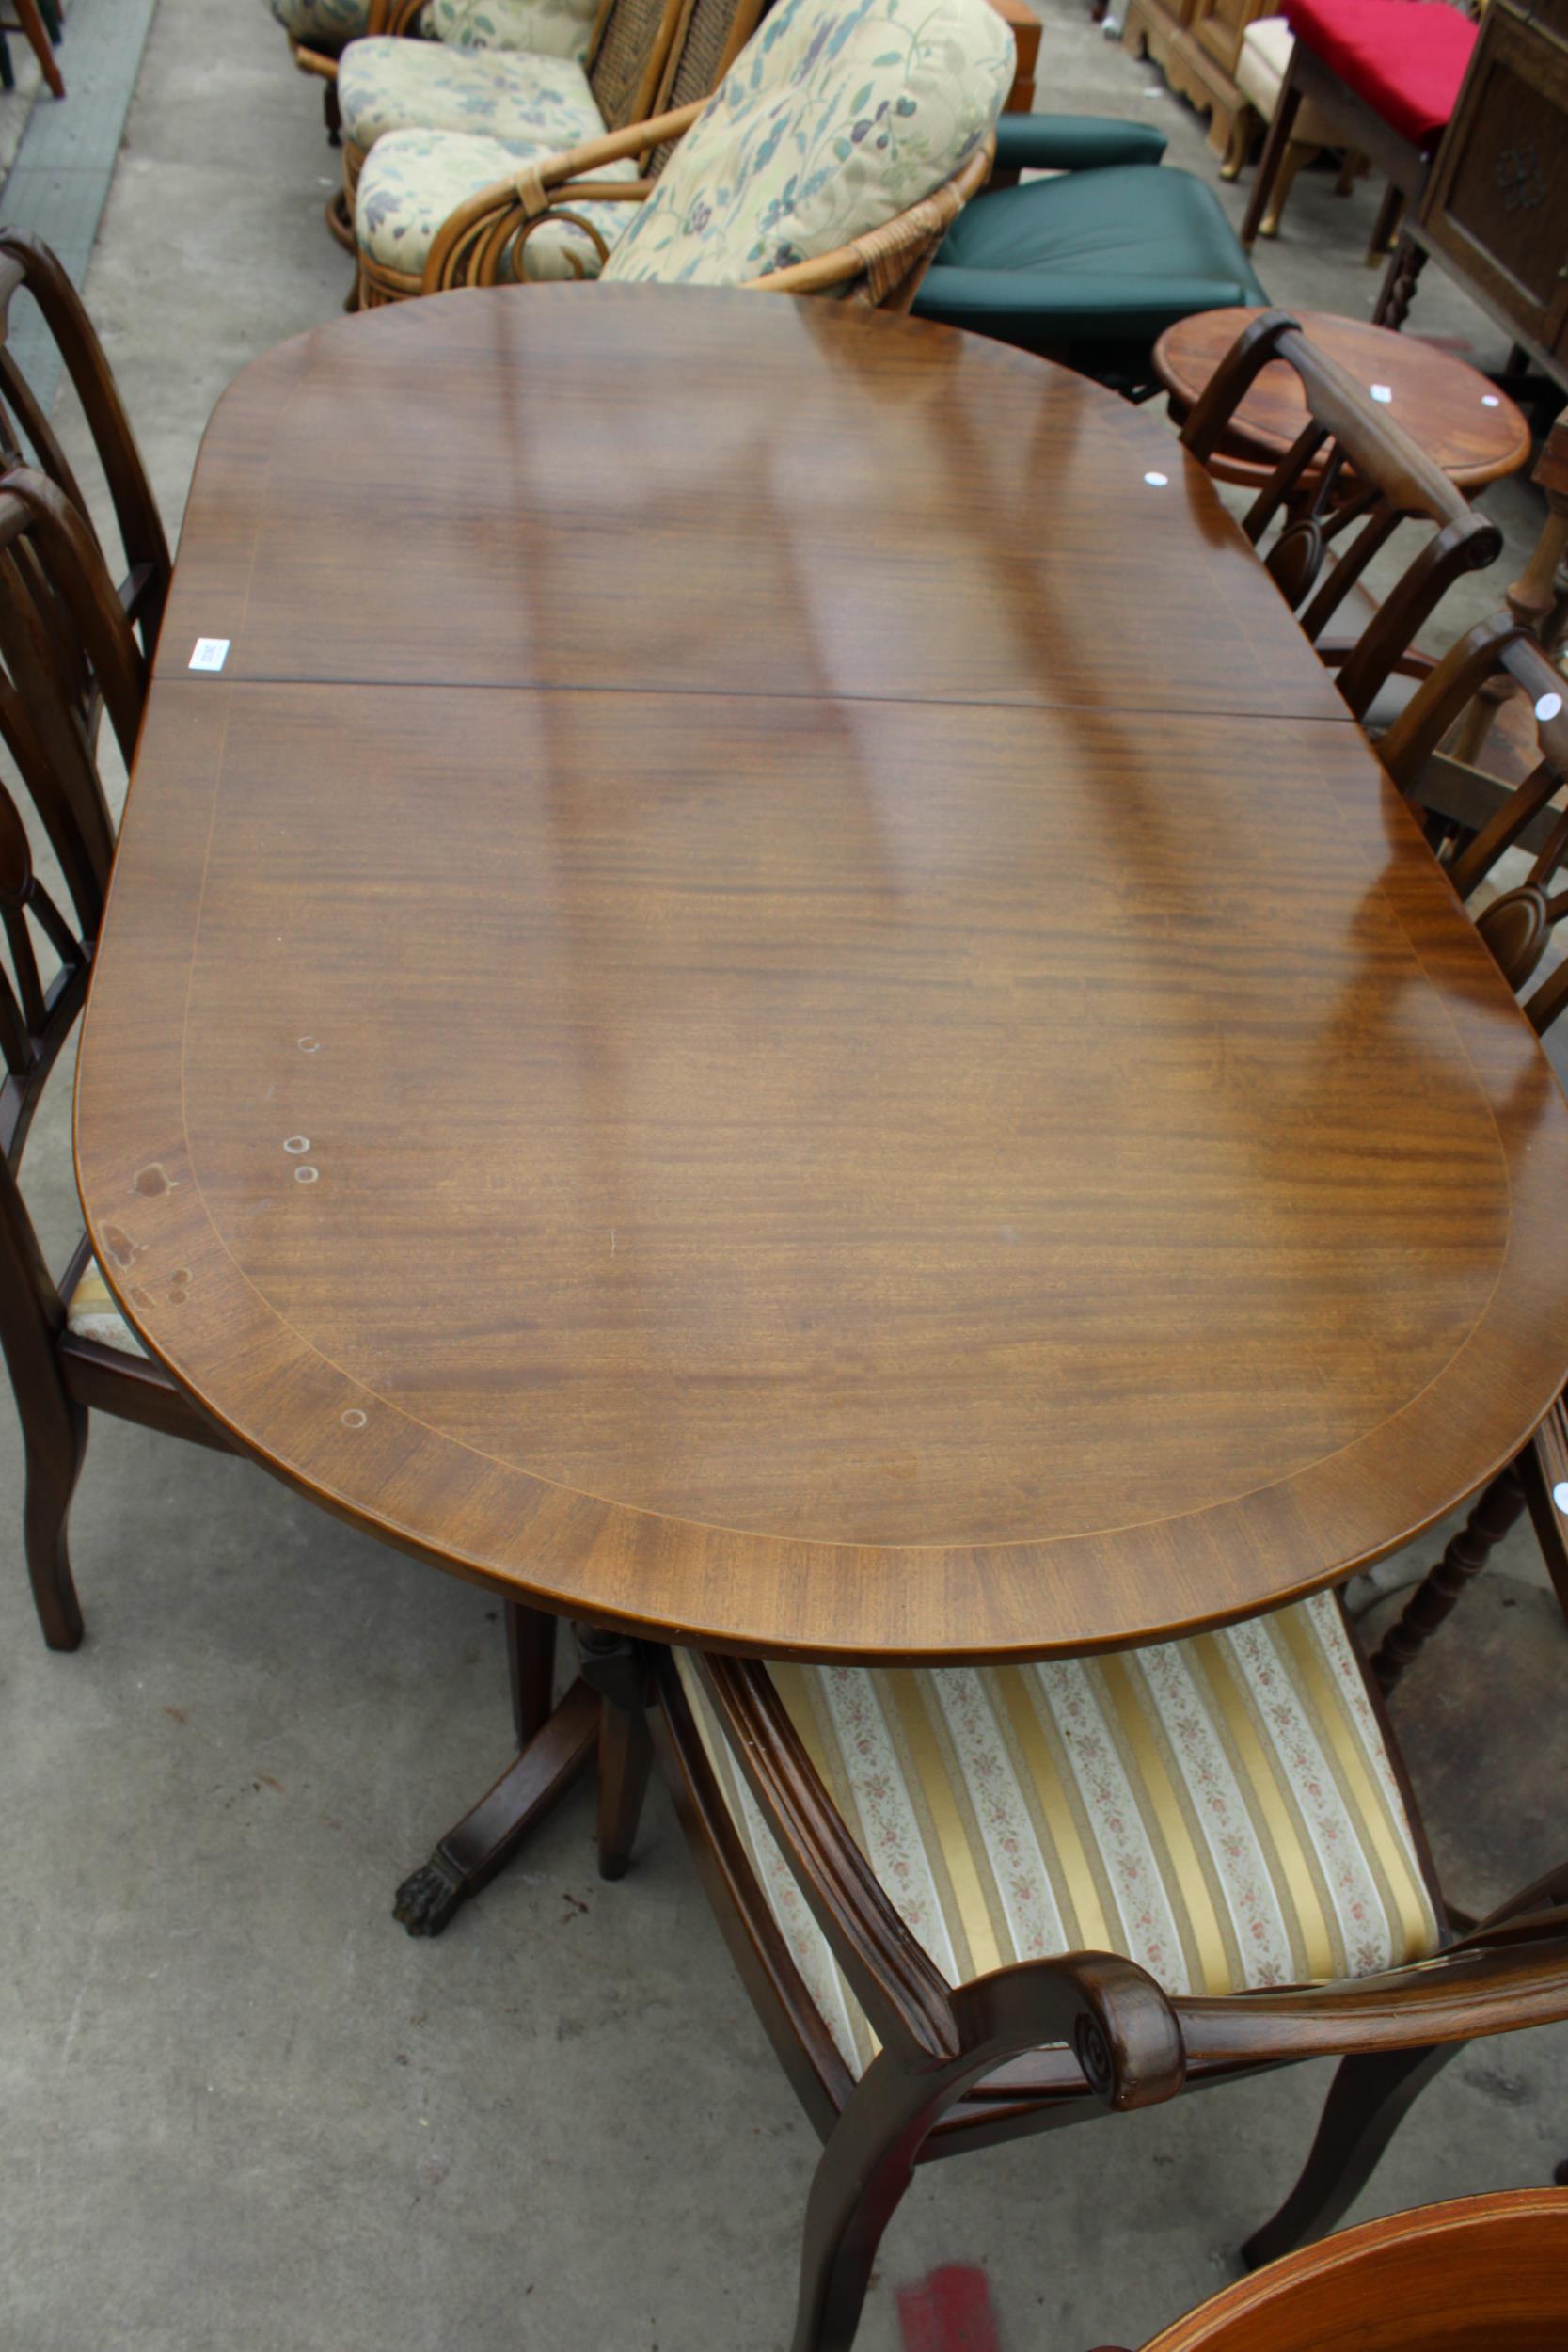 A REGENCY STYLE TWIN PEDESTAL DINING TABLE AND FIVE CHAIRS ONE BEING A CARVER - Image 3 of 3